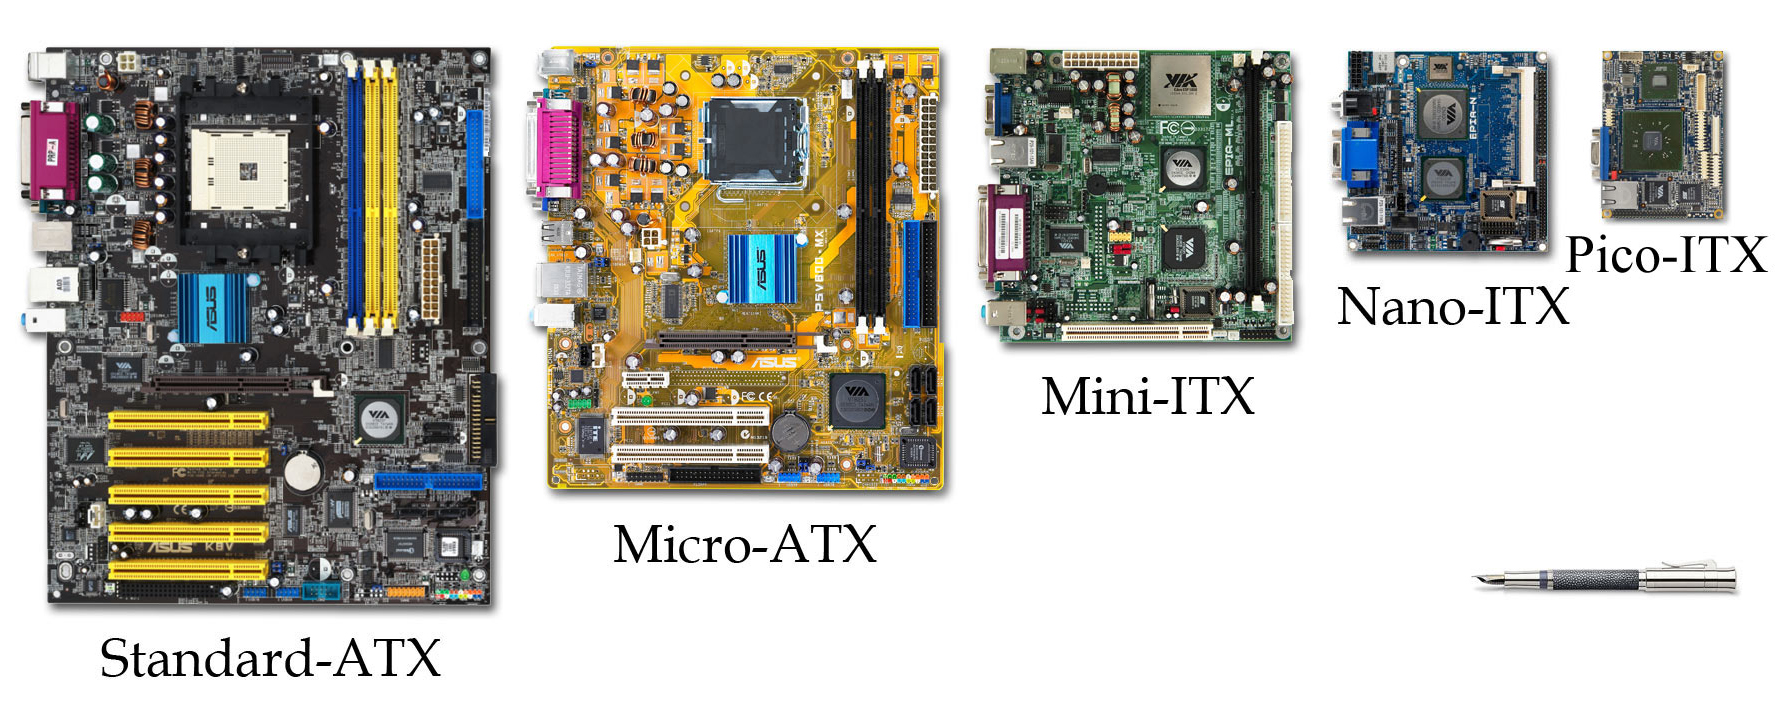 John’s Weekly Mini-Rant – M-STX, Do We Really Need Another Form Factor